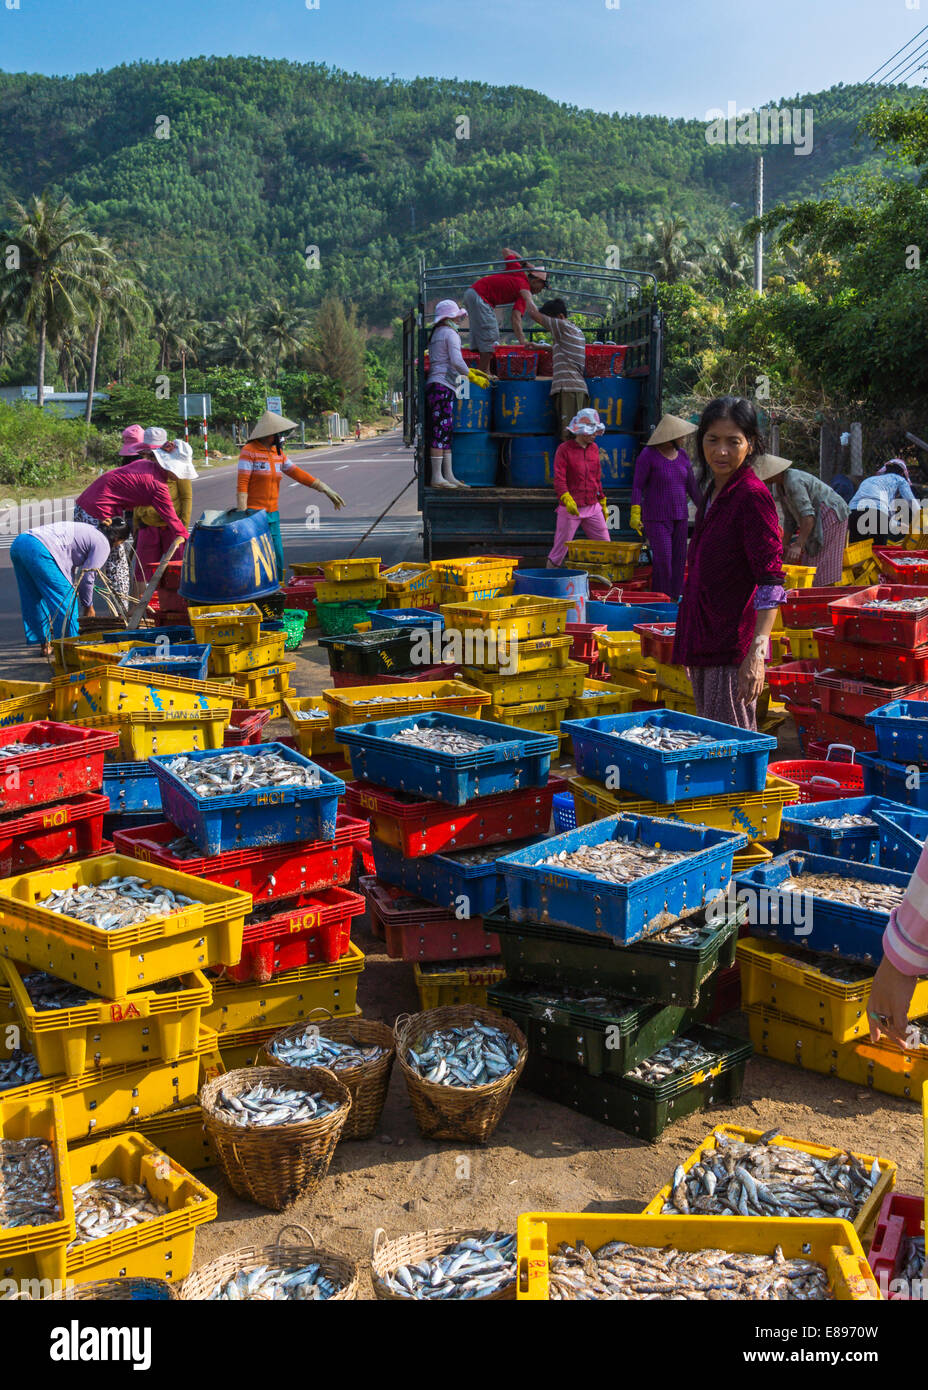 Vietnam Qui Nhon beach area - March 2012: Heaps of fish on yellow, blue and red plastic containers are sorted. Stock Photo